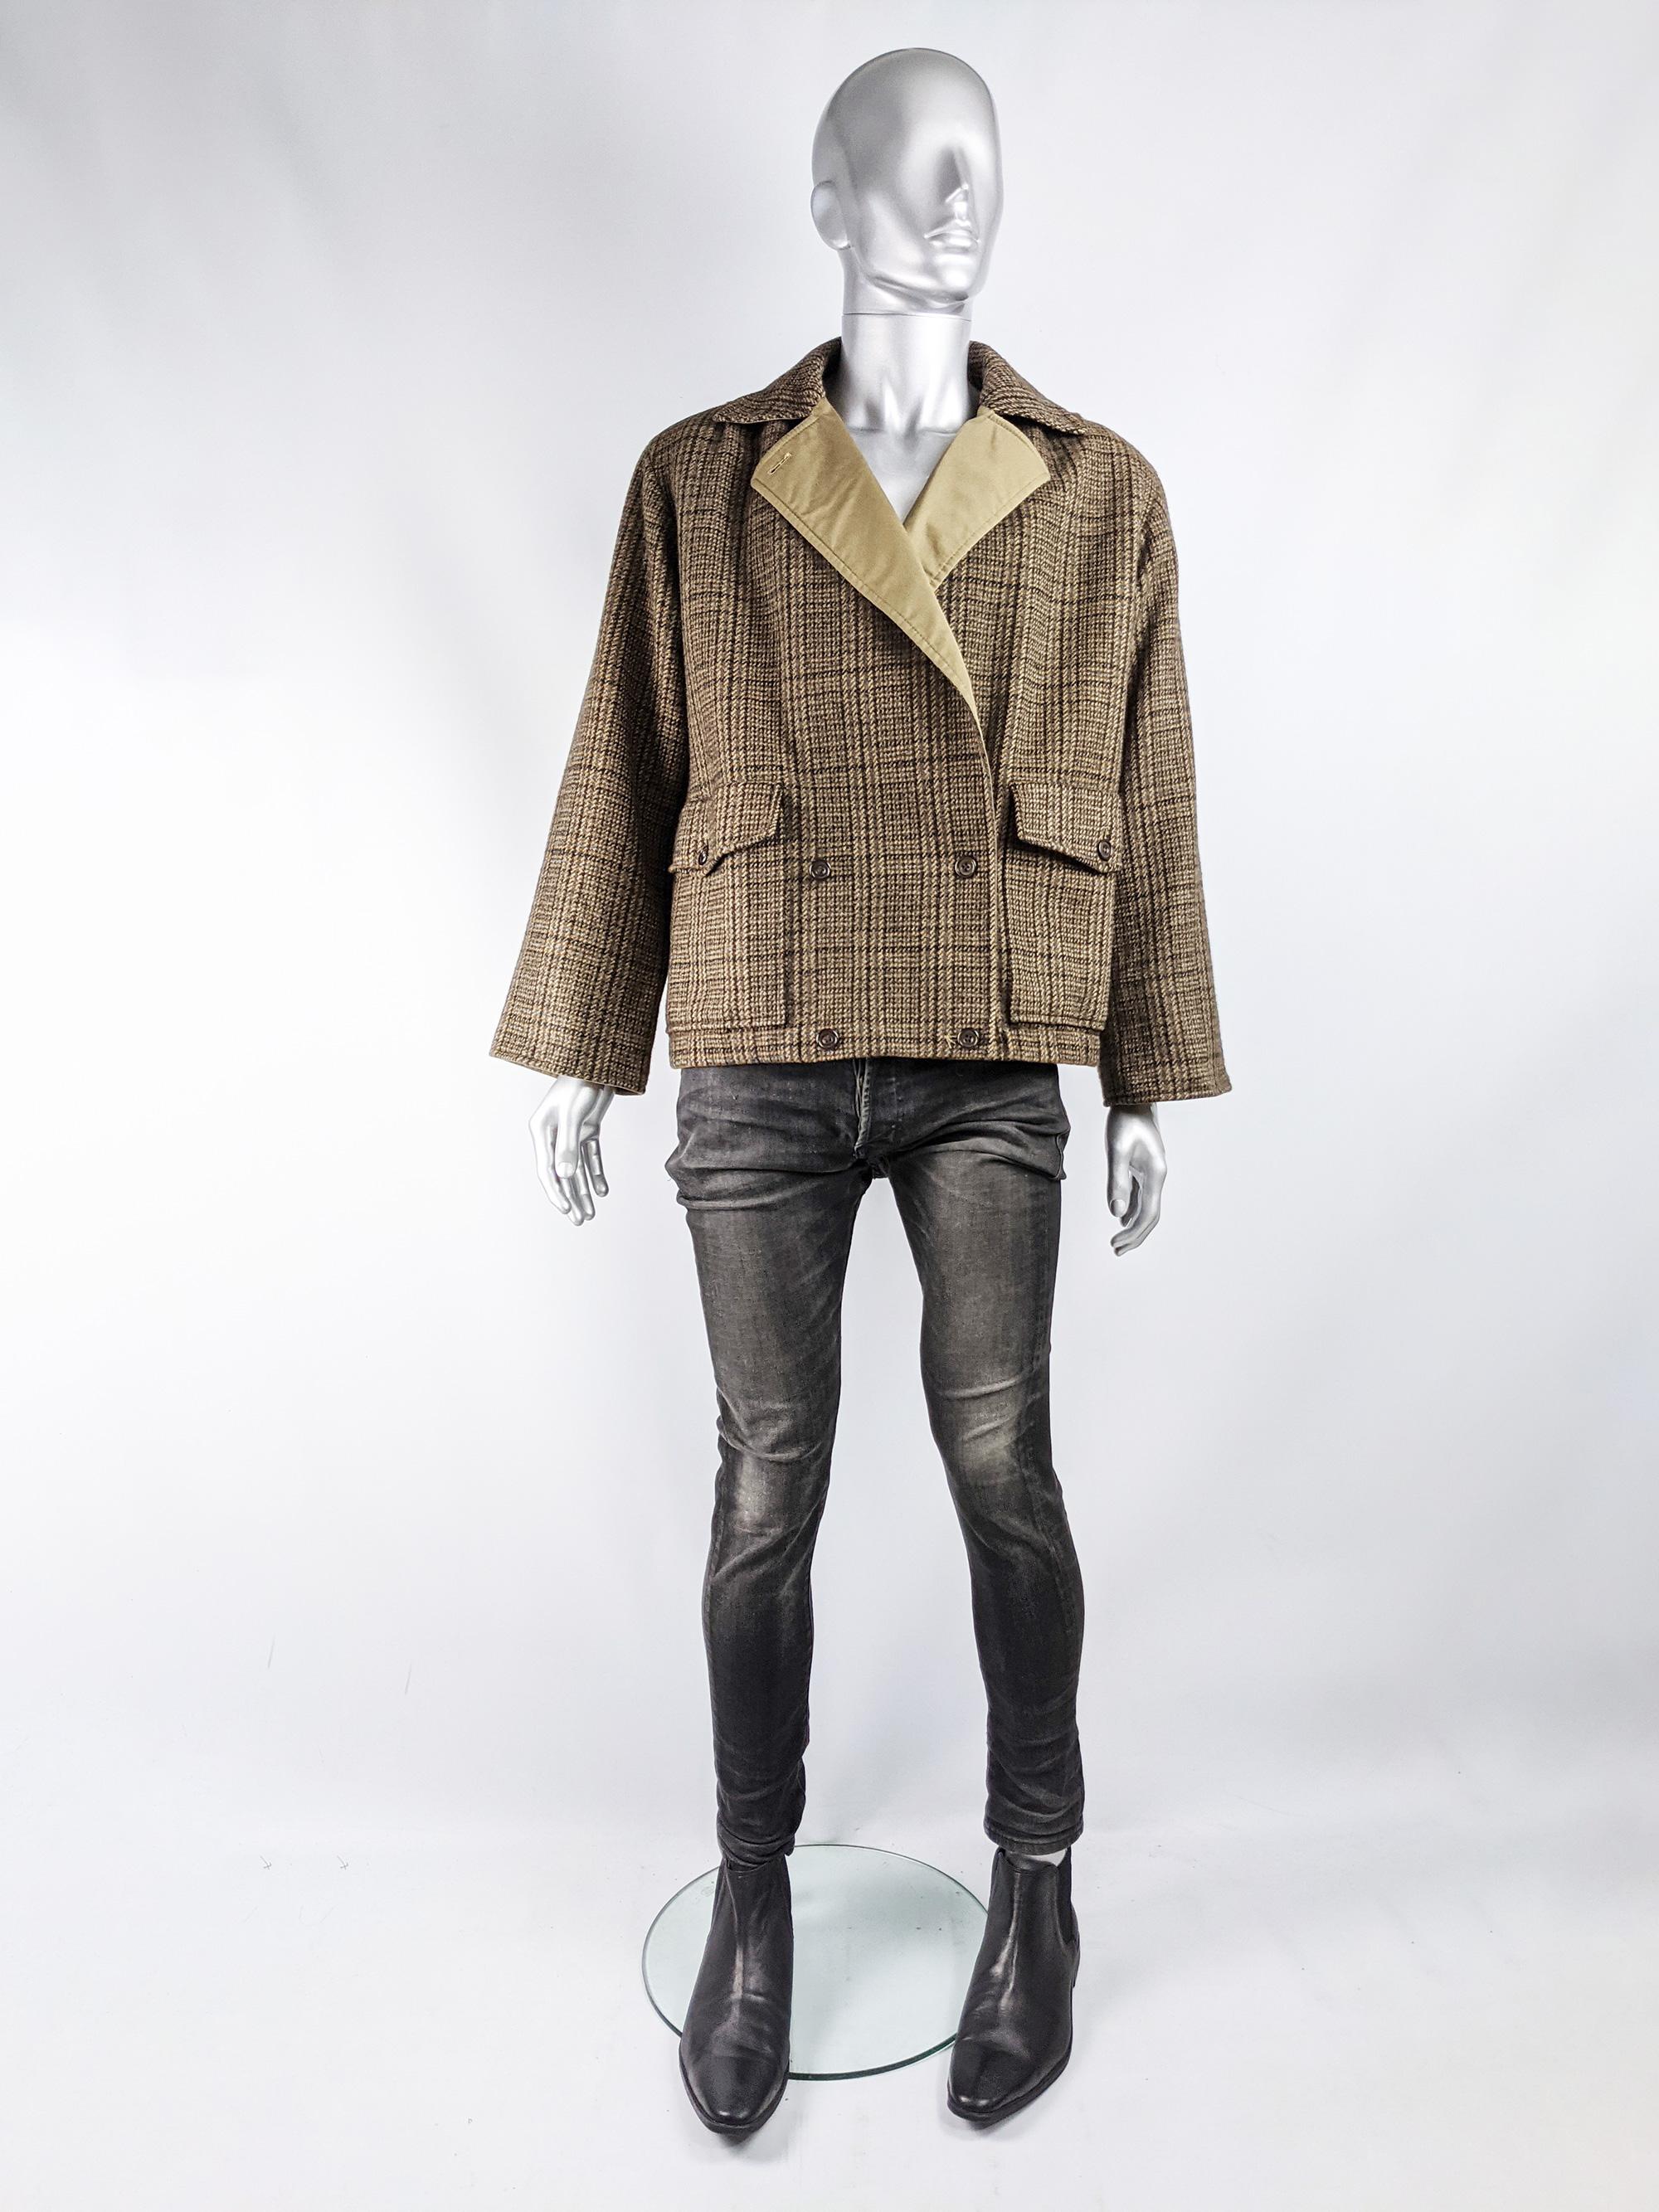 A stylish and unusual mens short  mod style vintage jacket from the 80s by luxury British fashion house, Aquascutum.  In a brown pure wool tweed with a beige facing on the collar. It has double breasted buttons and a shorter, boxy fit. 

Size: